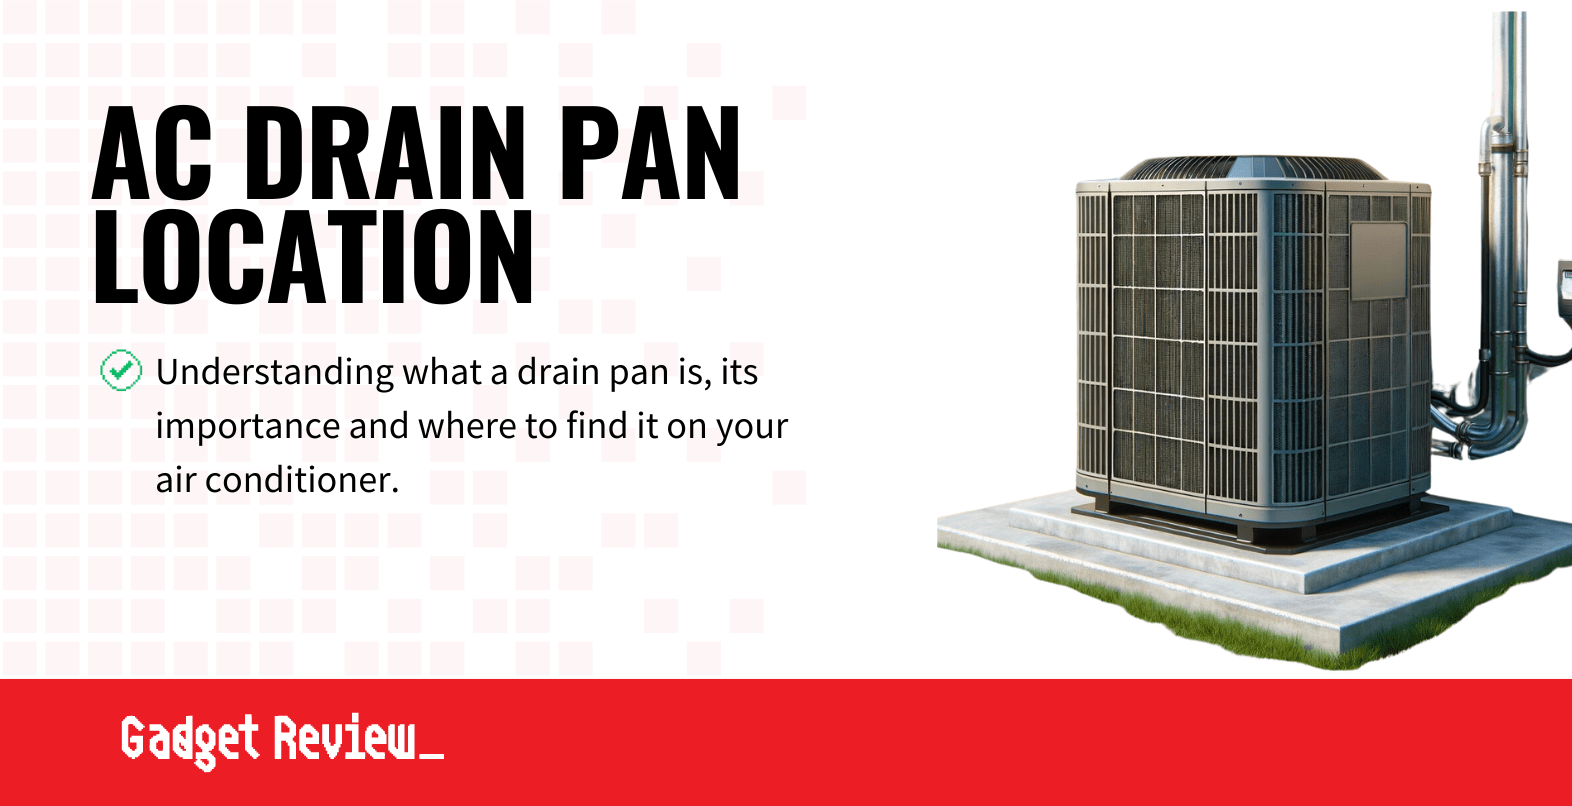 Where Is The AC Drain Pan Location?